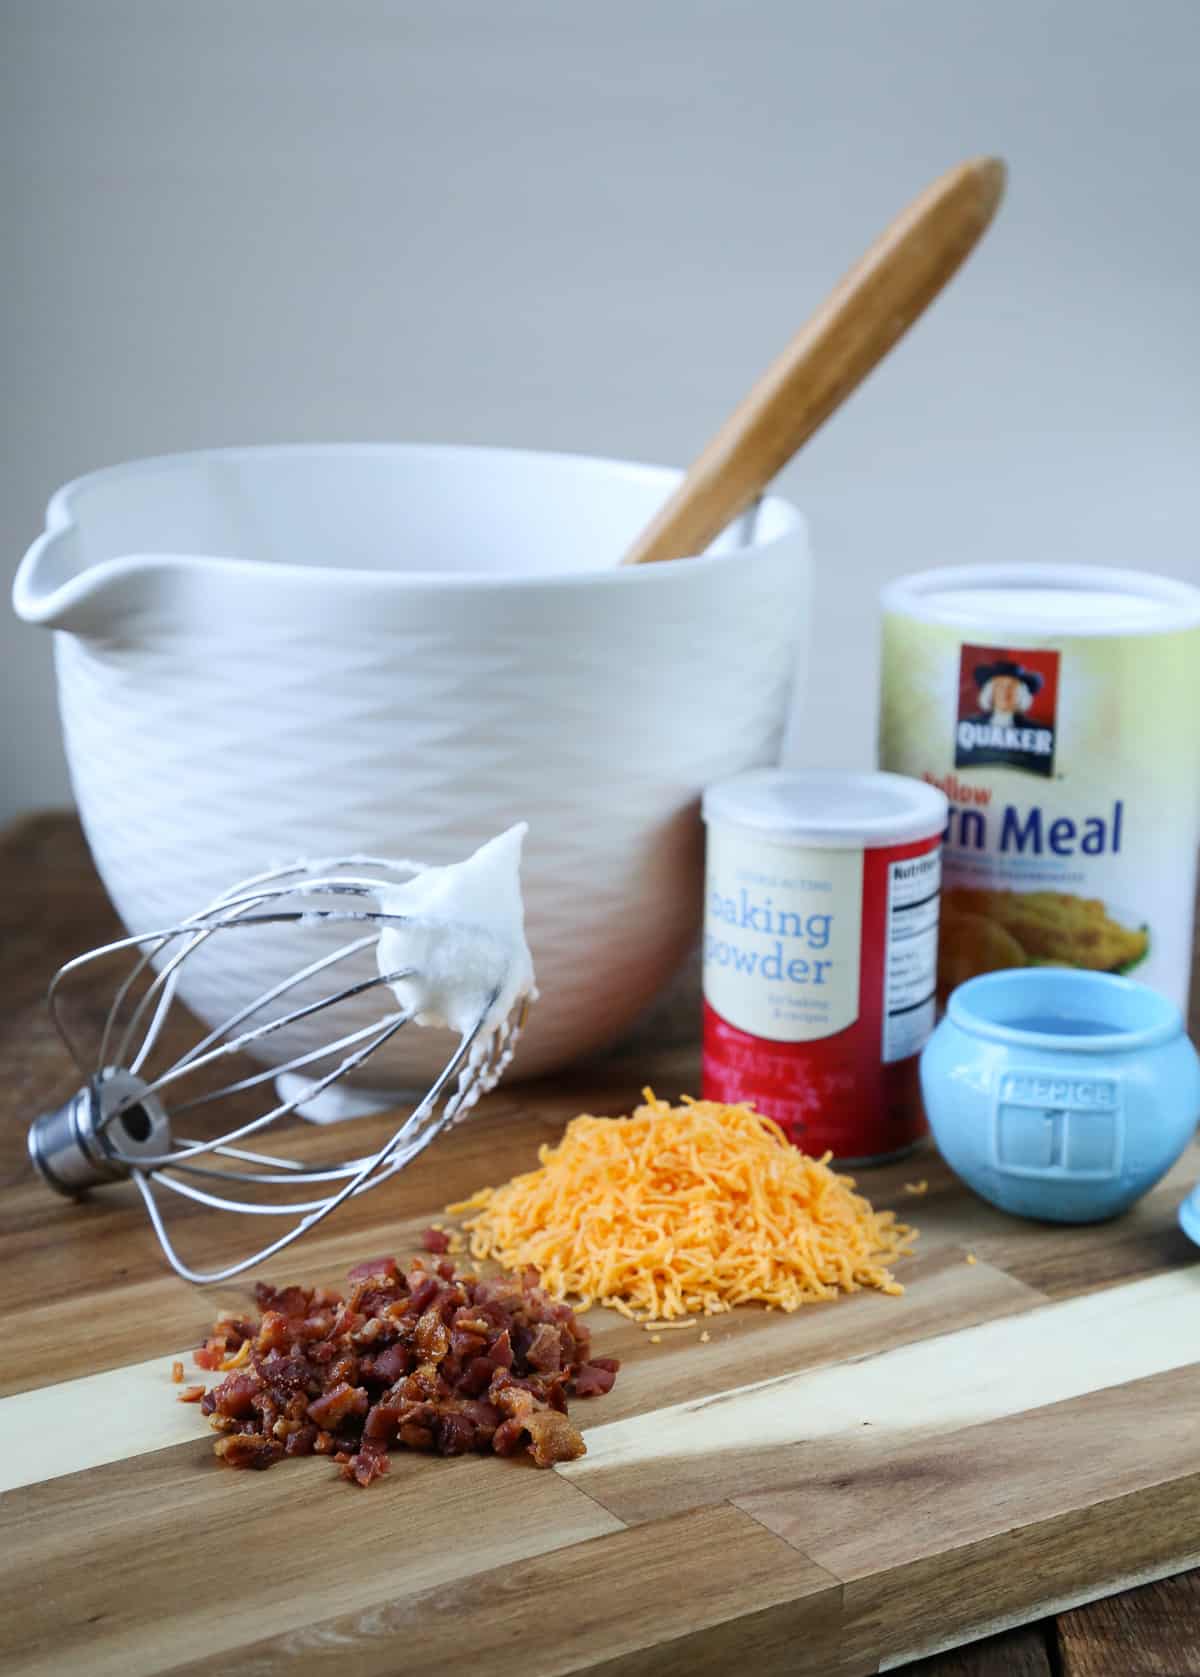 white mixing bowl, shredded cheddar, chopped bacon and other ingredients on a wooden board.